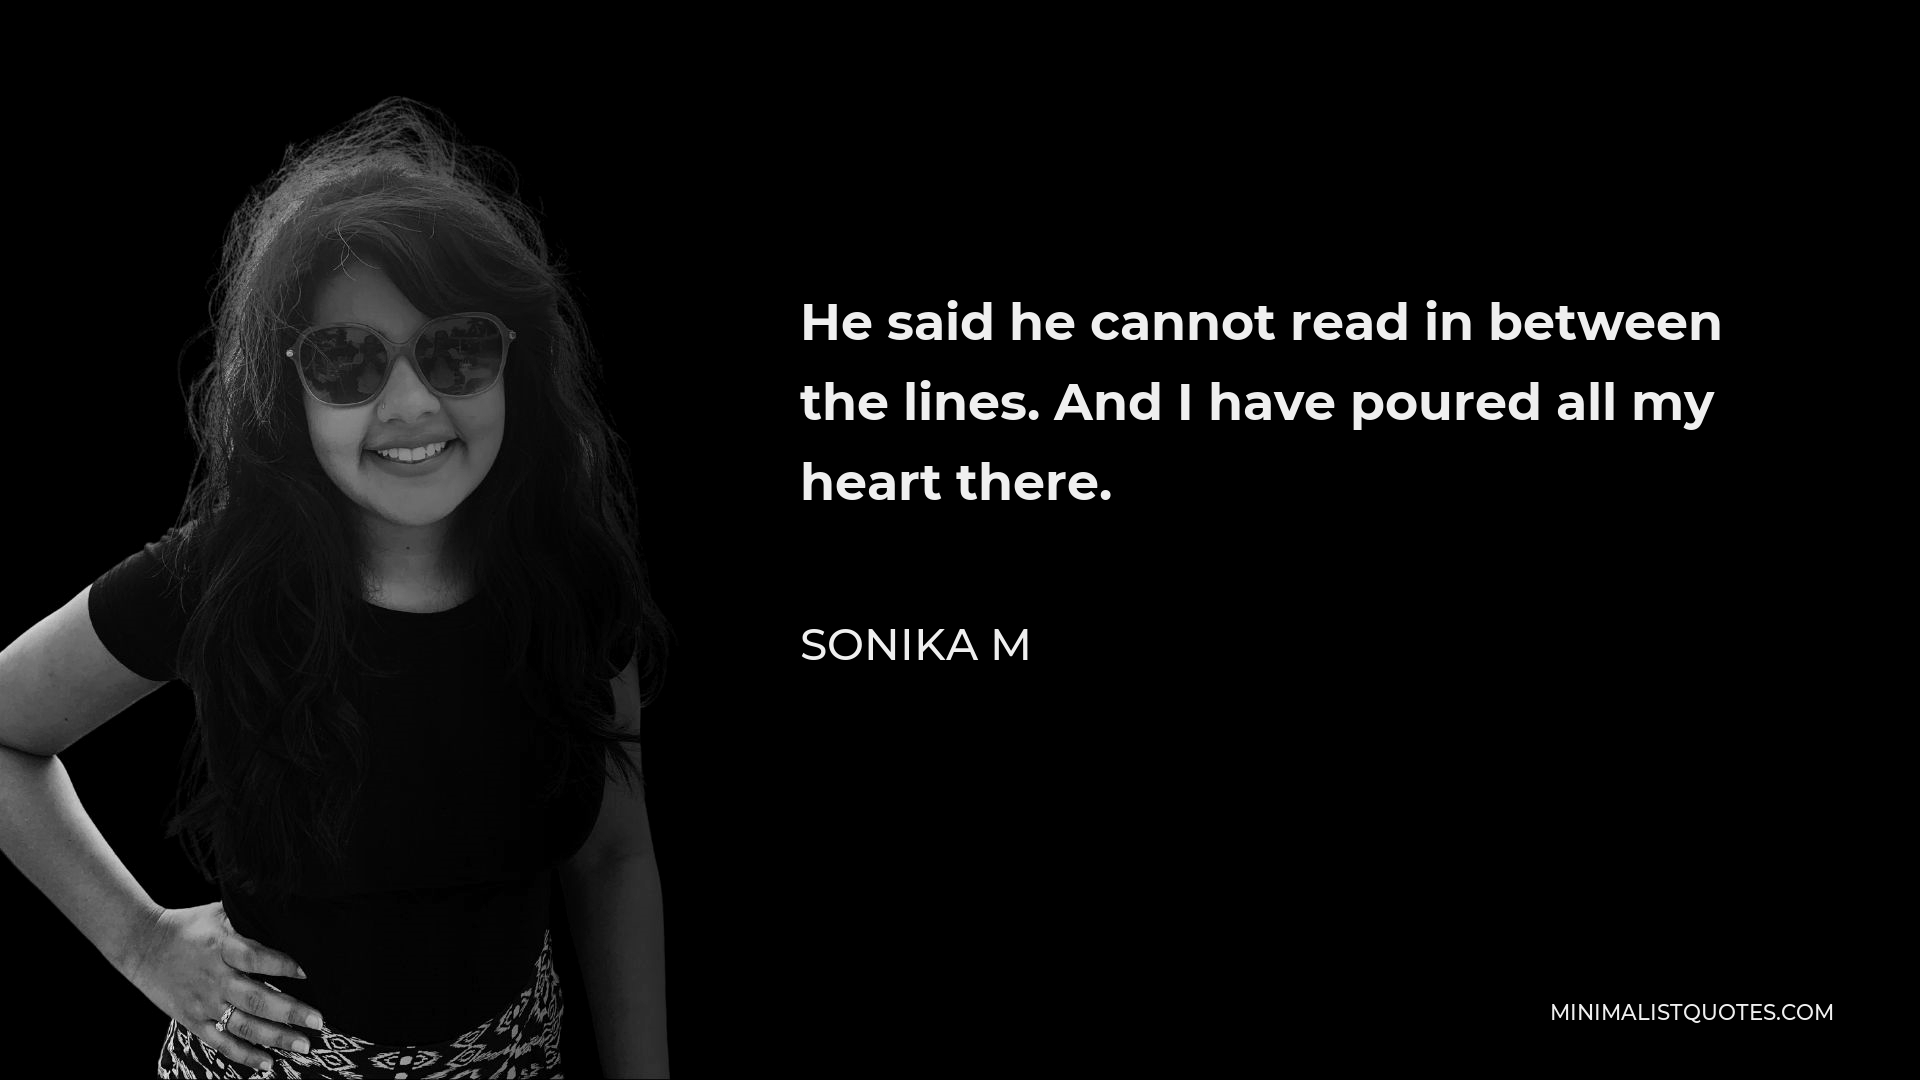 Sonika M Quote - He said he cannot read in between the lines. And I have poured all my heart there.